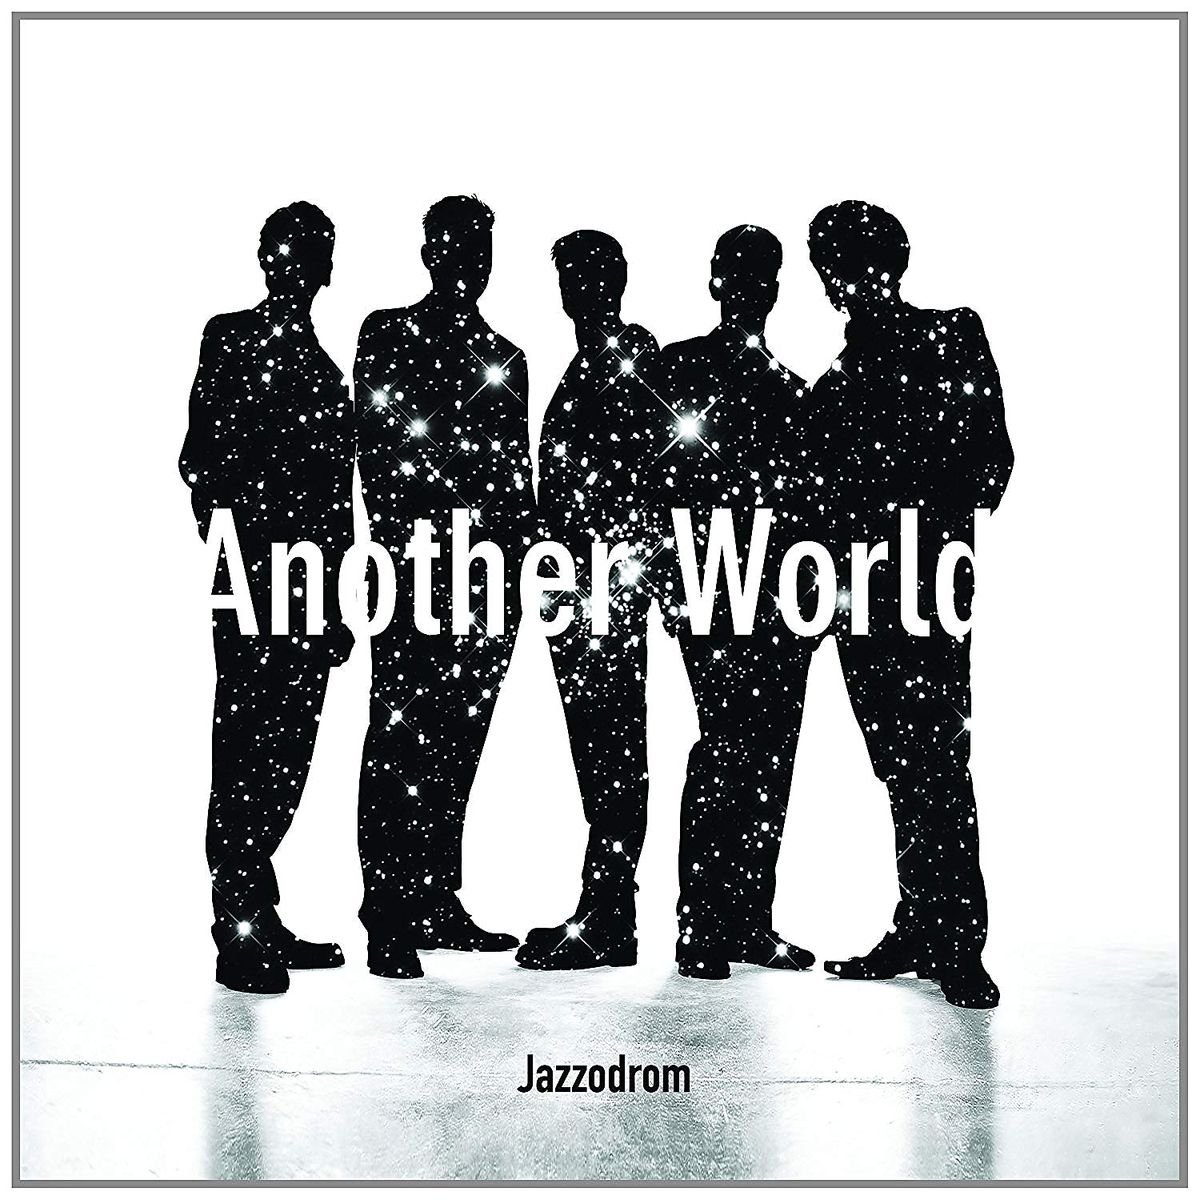 JAZZODROM - Another World cover 